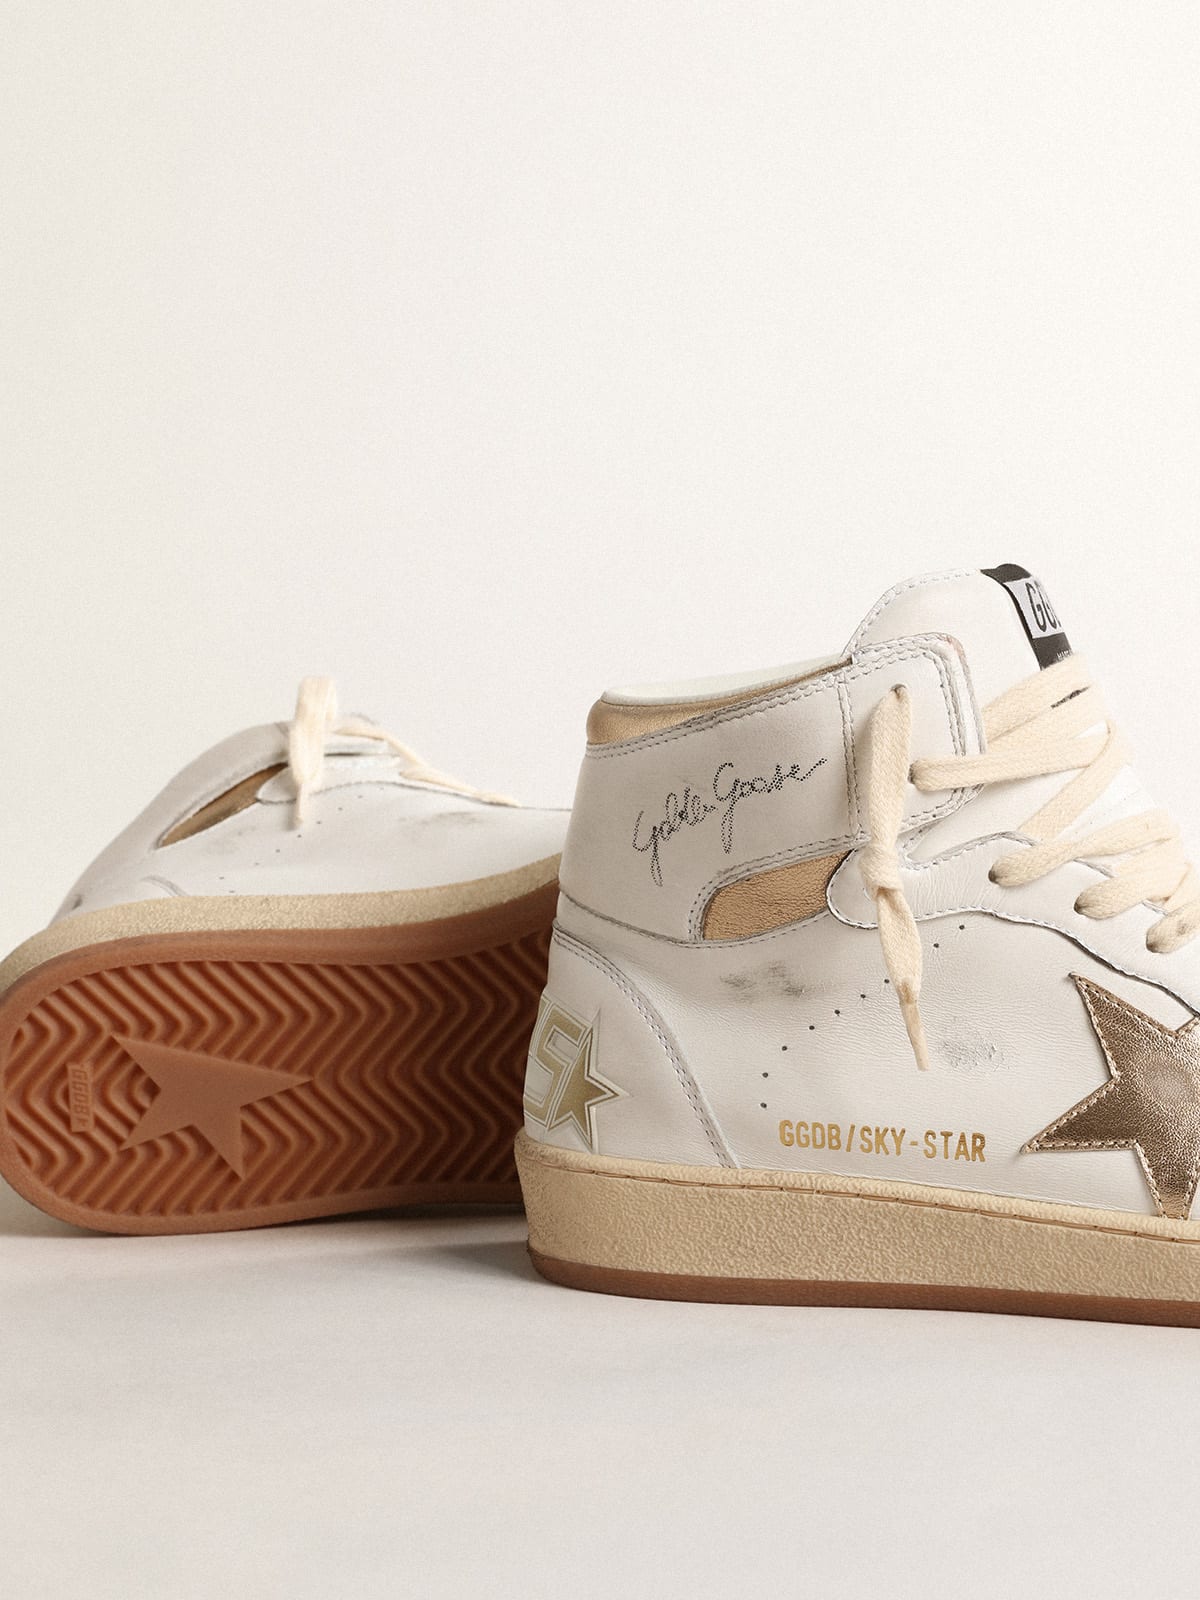 Golden Goose - Sky-Star in white nappa leather with gold metallic leather star and heel tab in 